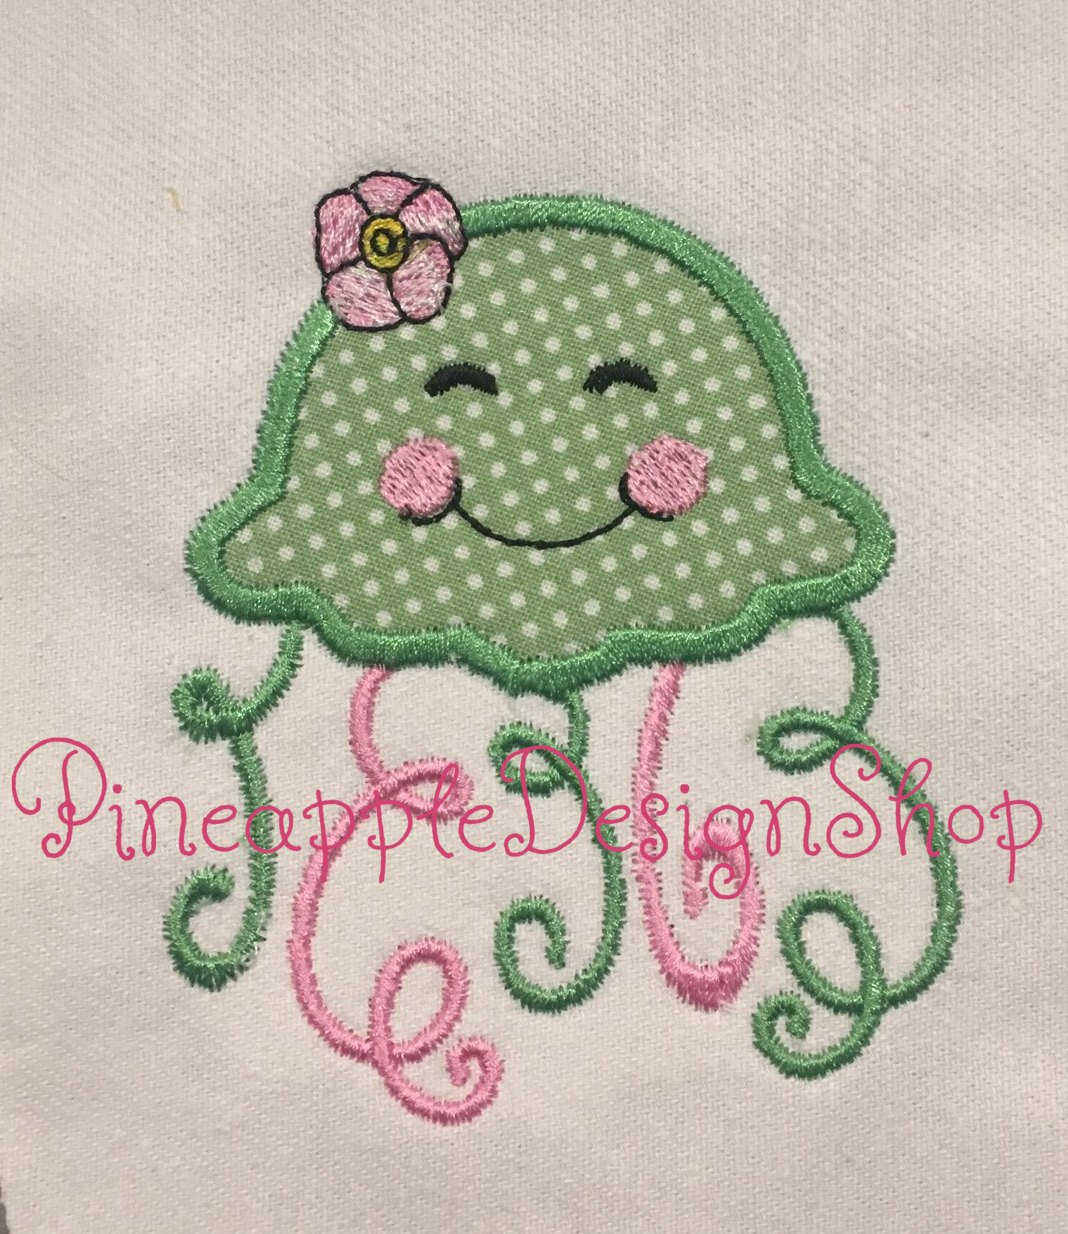 Embroidery Patterns For Kids Jellyfish Embroidery Designgirl Jellyfish Applique Designjellyfish Applique Design Kids Embroidery Designjellyfish Appliquejellyfish